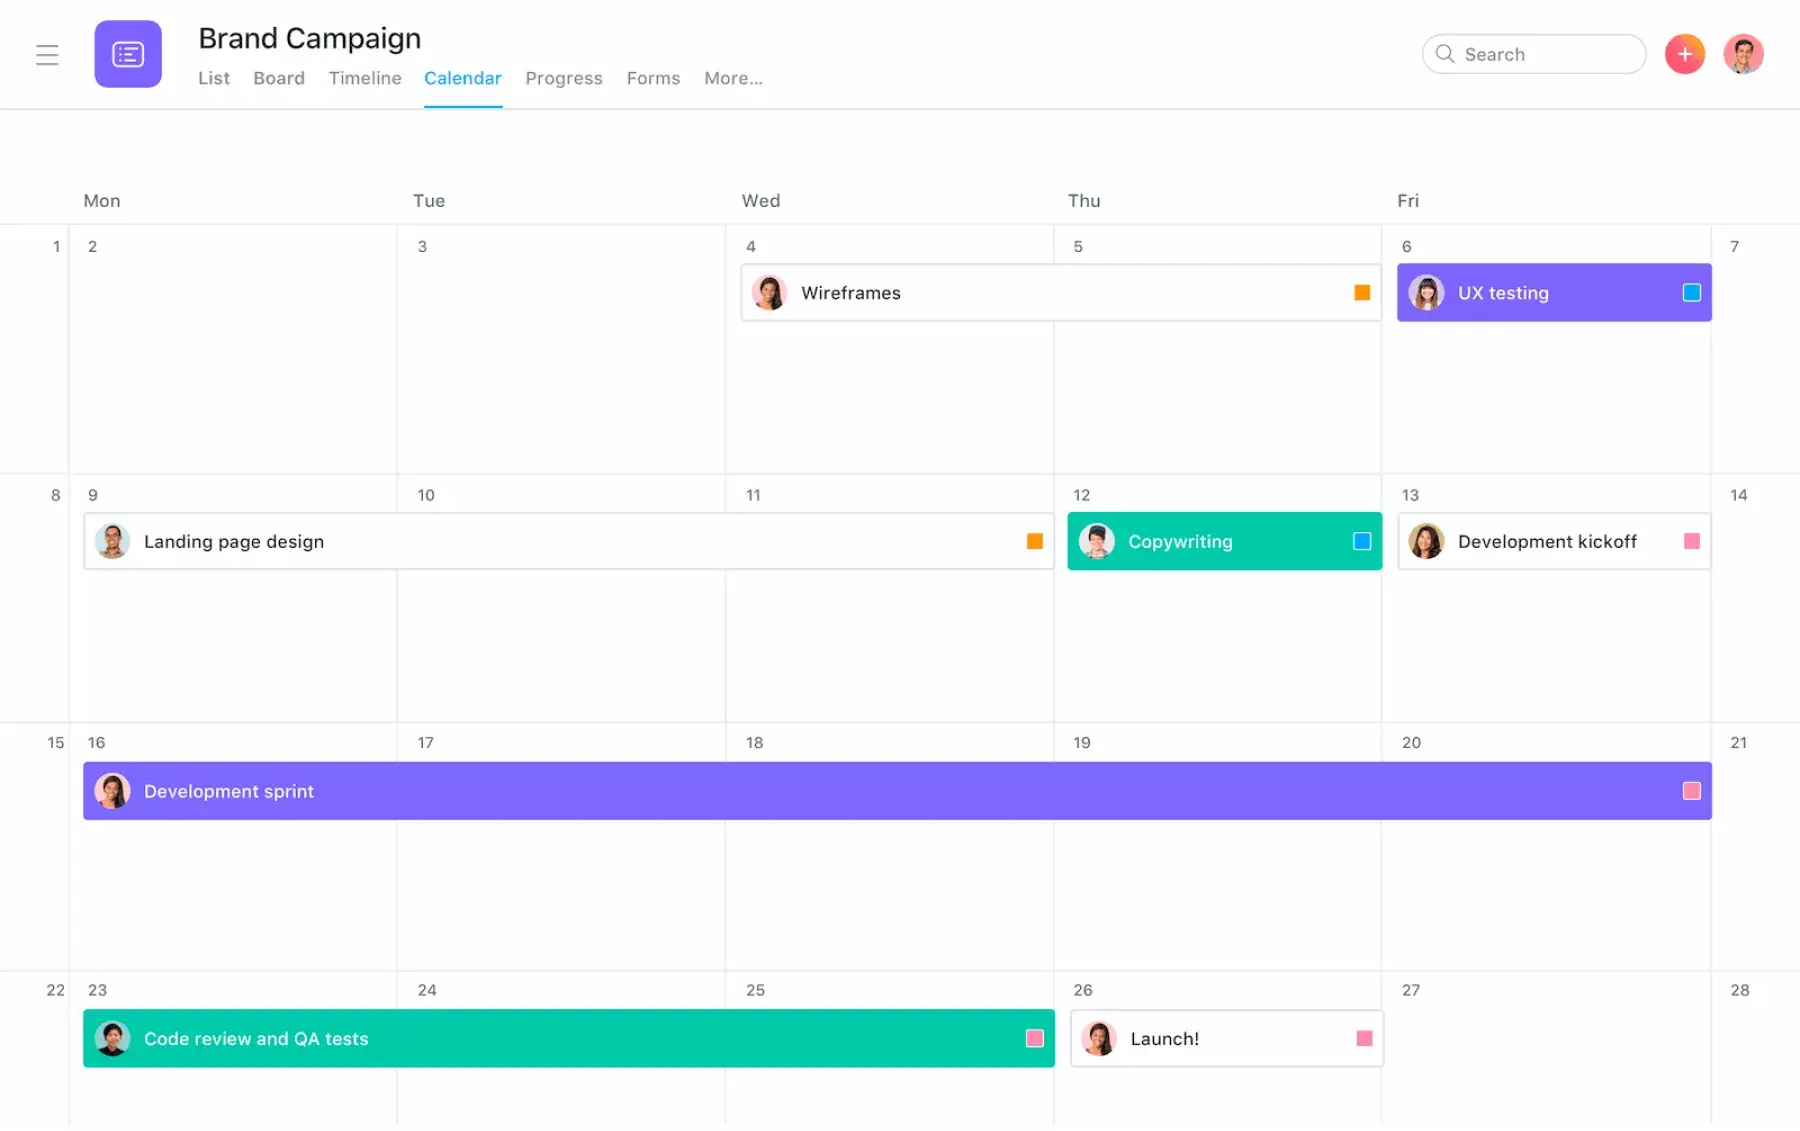 [Product] Brand Campaign project in Asana (Calendar View)